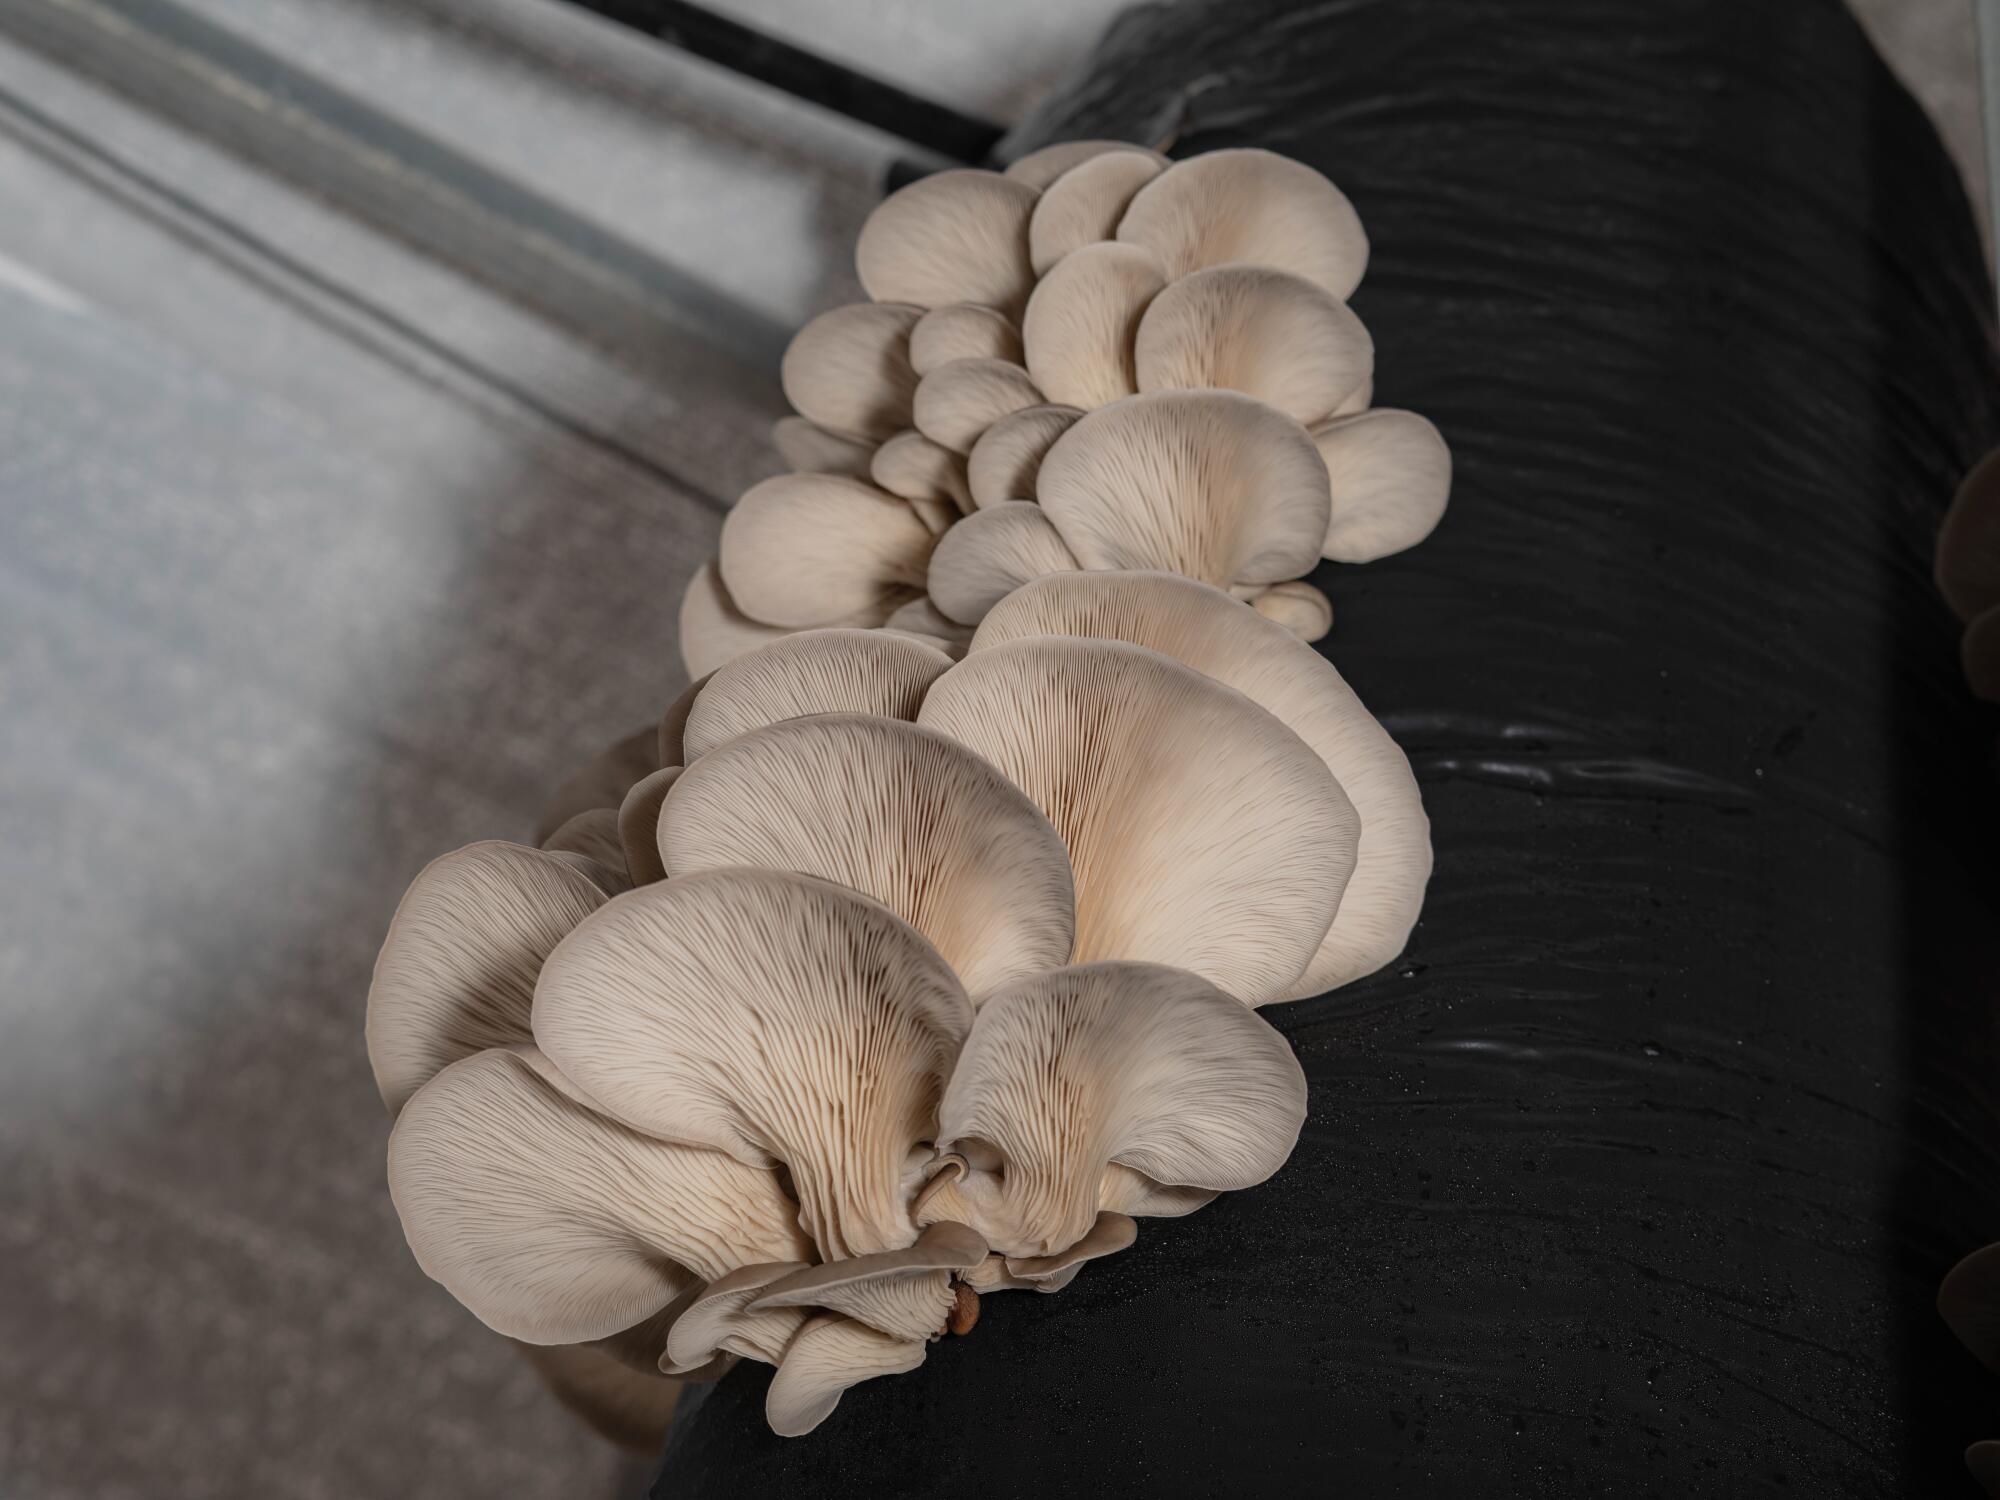 A close-up of a bunch of mushrooms growing out of a bag.